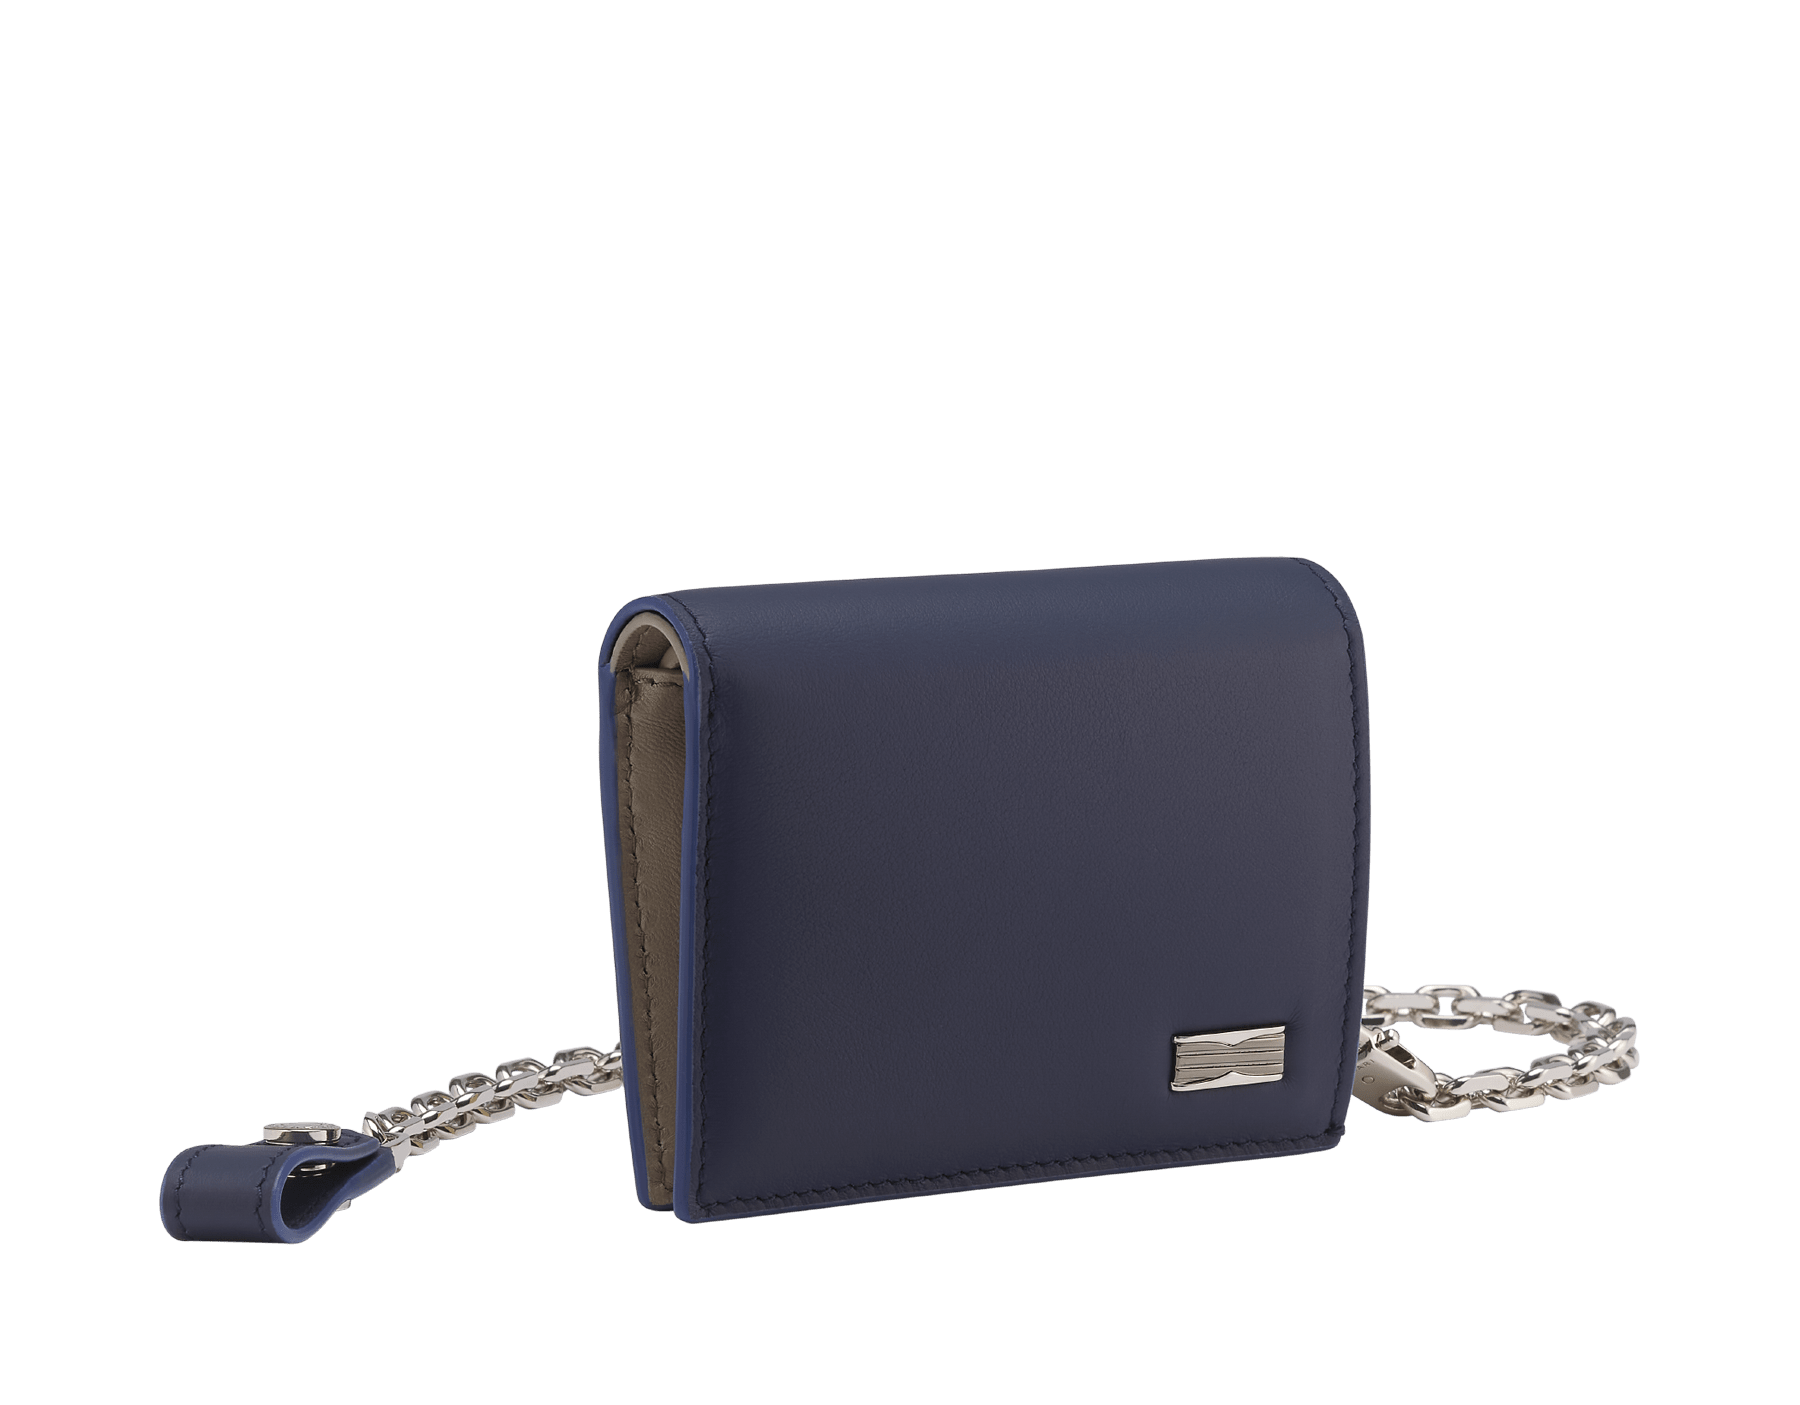 B.zero1 Man compact wallet with chain in black matt calf leather with niagara sapphire blue nappa leather interior. Iconic dark ruthenium and palladium-plated brass embellishment, and folded press-stud closure. BZM-COMPACTWALLET image 1